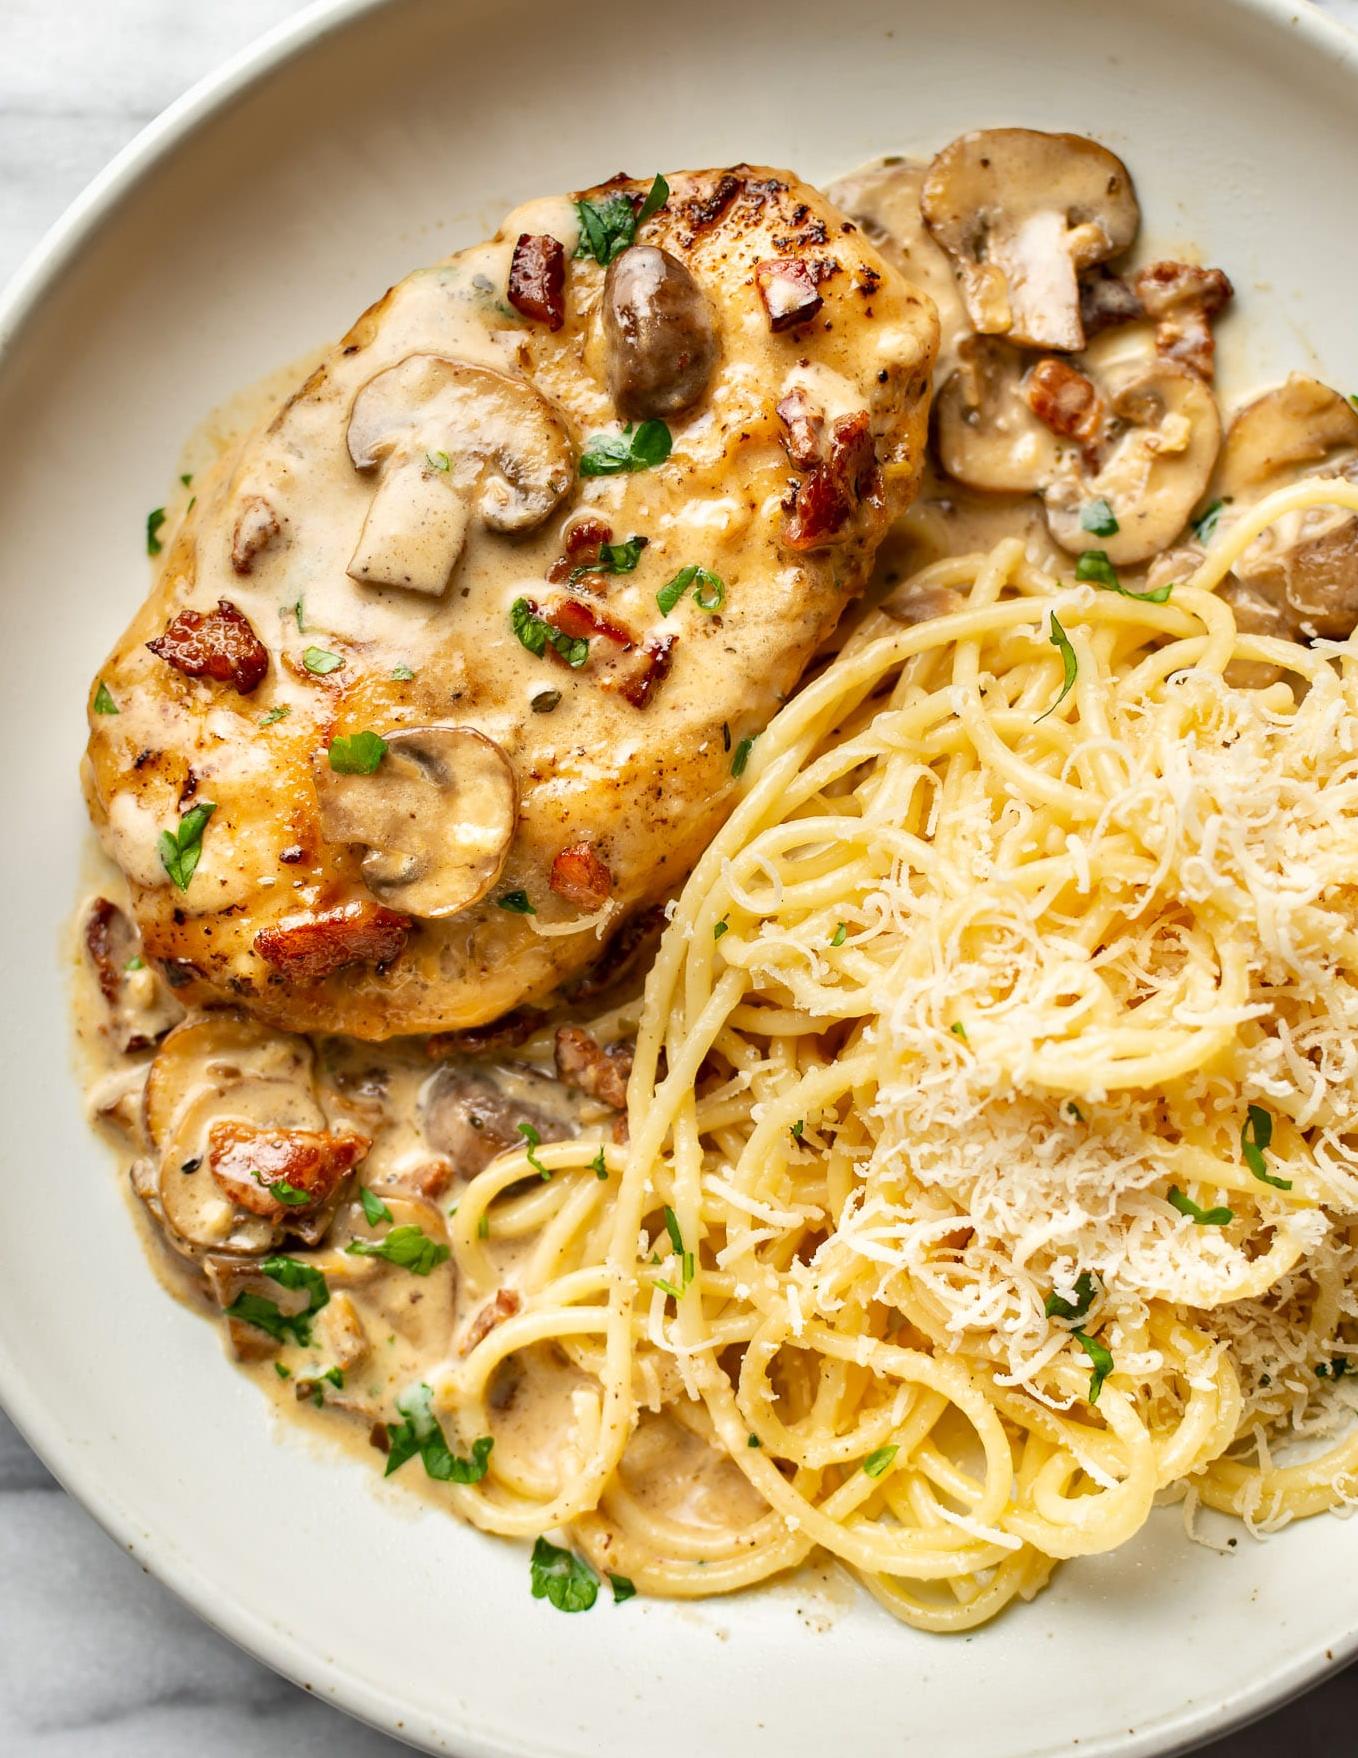  Don't settle for plain chicken dinners, indulge in the rich flavors of Chicken Riesling.